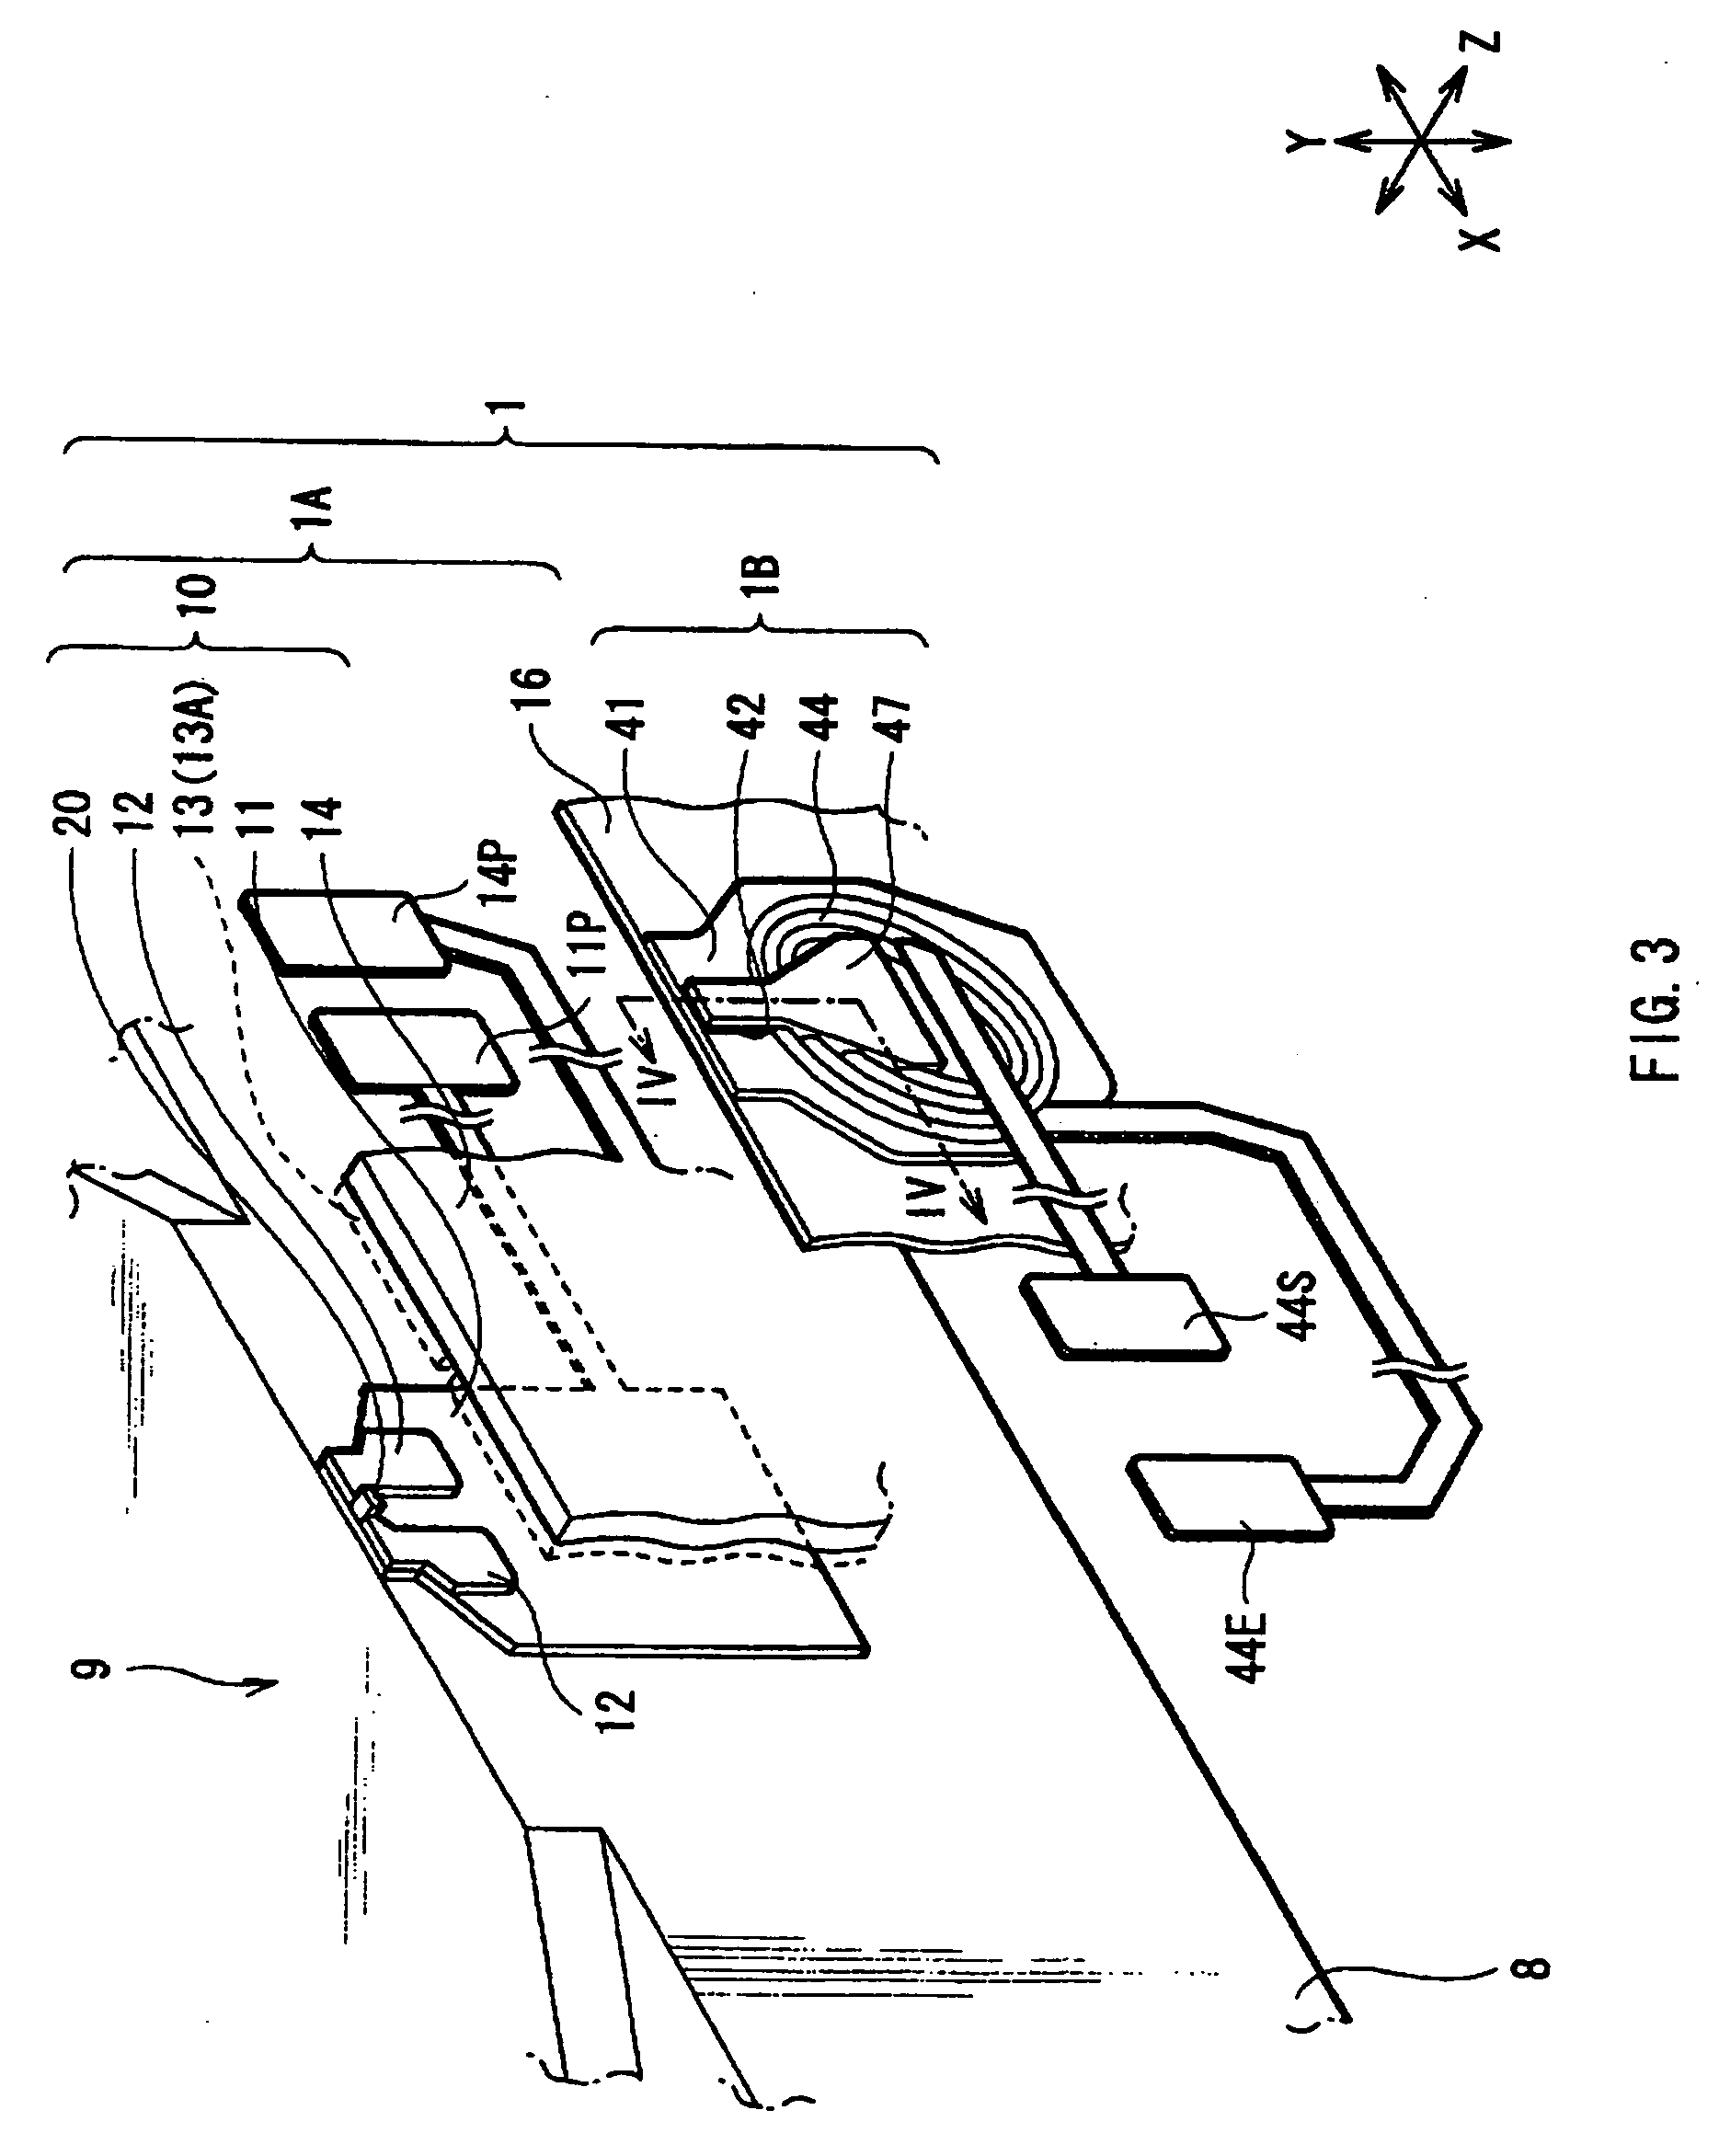 Magnetoresistive device, thin film magnetic head, head gimbals assembly, head arm assembly, magnetic disk apparatus, synthetic antiferromagnetic magnetization pinned layer, magnetic memory cell, and current sensor